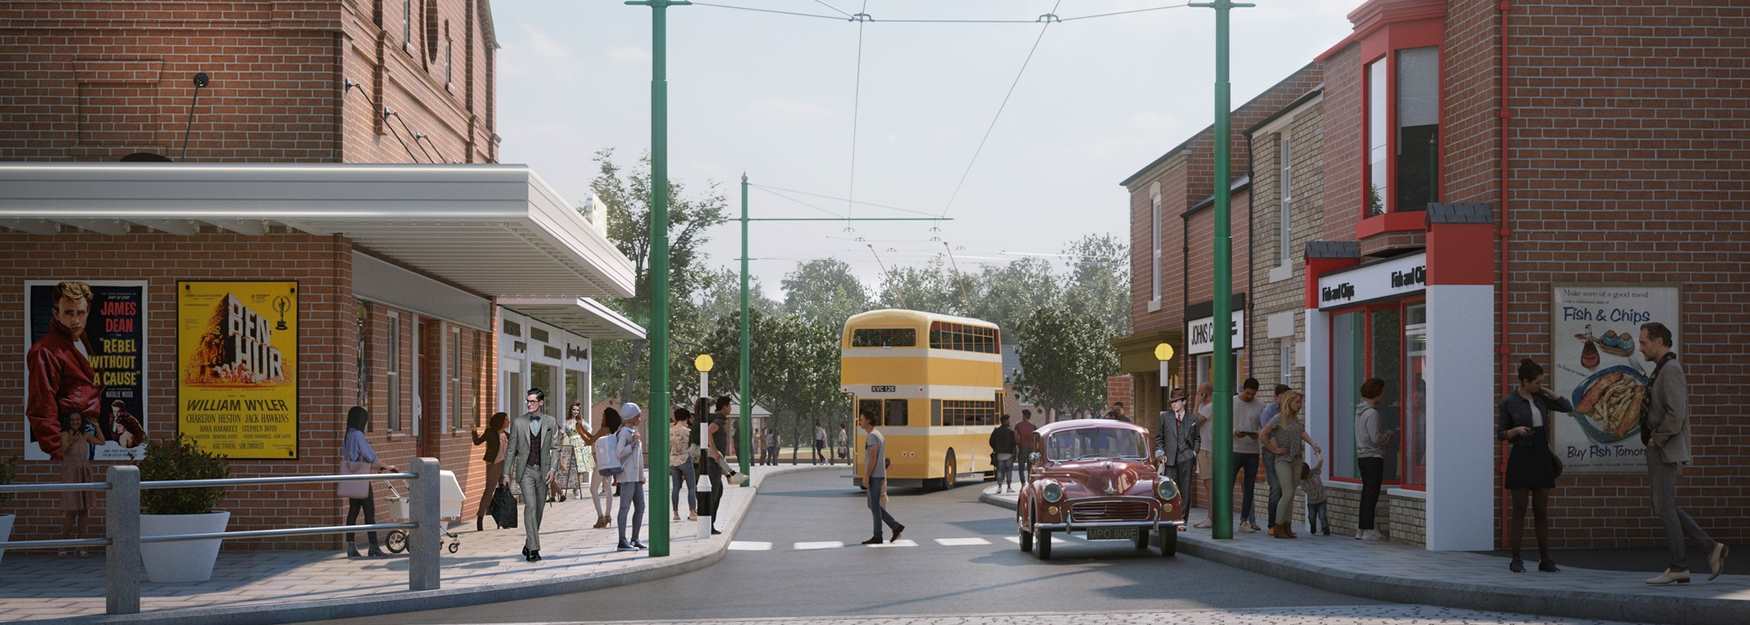 An illustration of Beamish 1950's Town